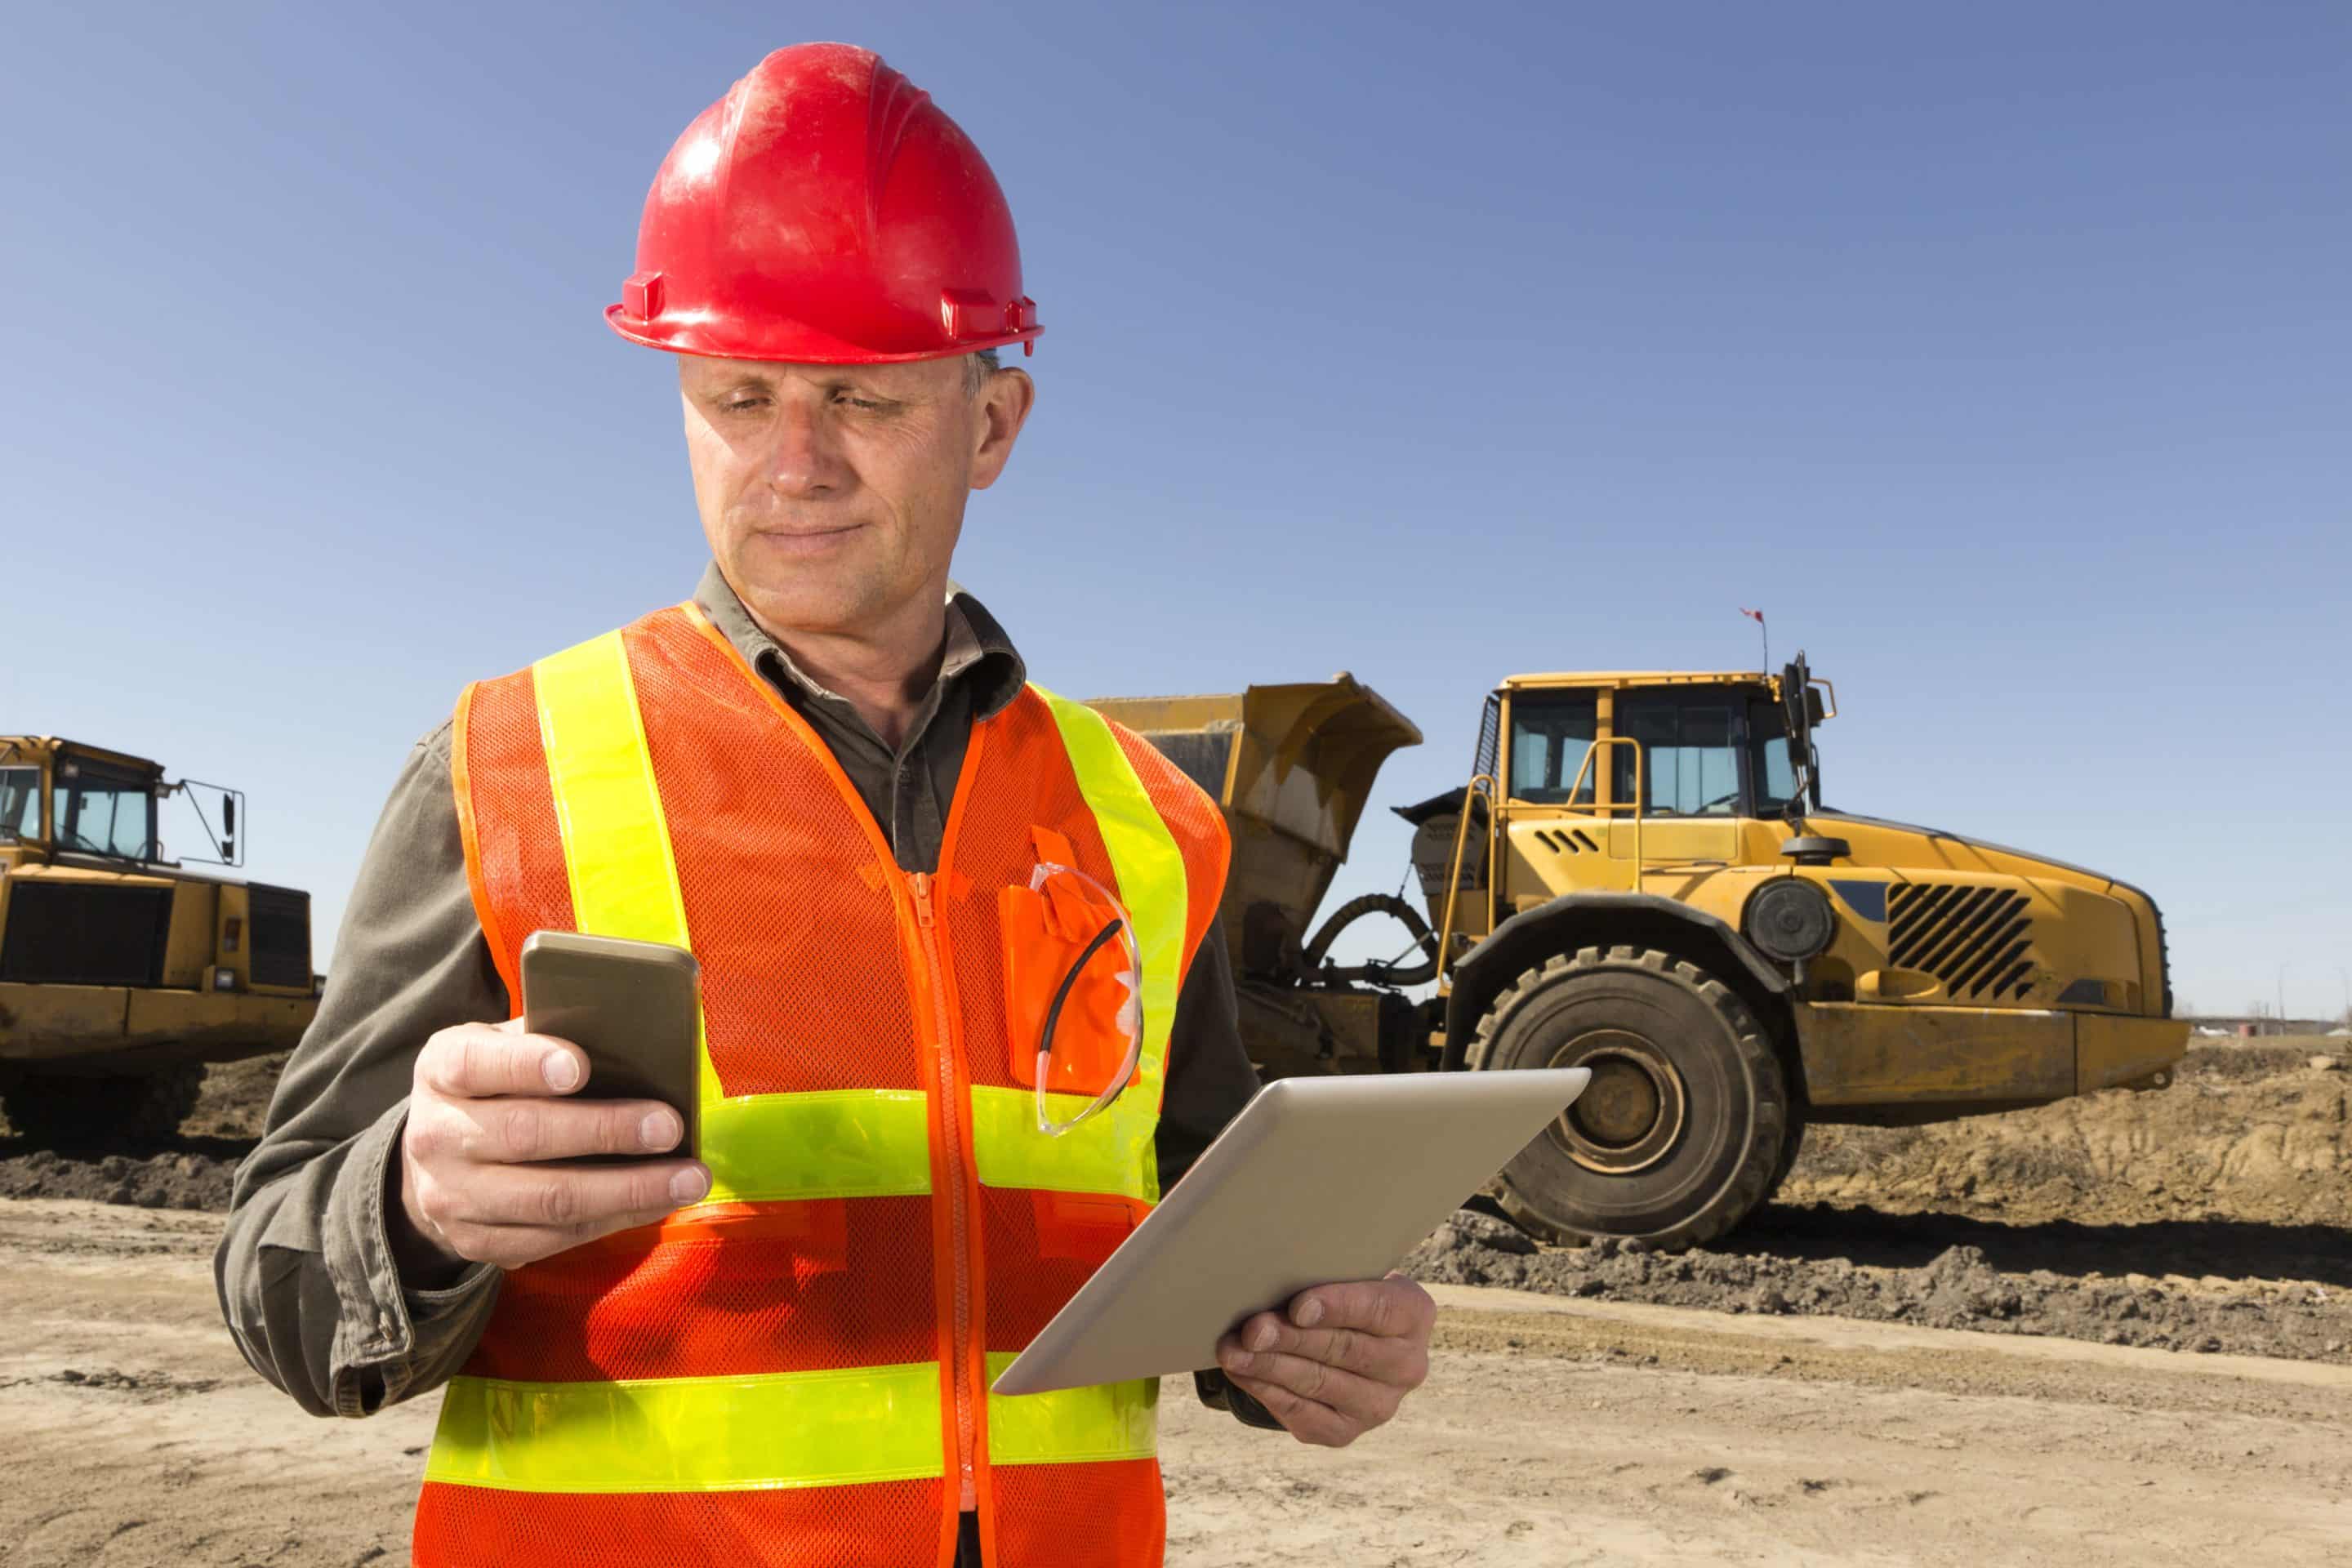 MOBILE FIELD SERVICE INVESTMENT IN FIELD SERVICE MANAGEMENT